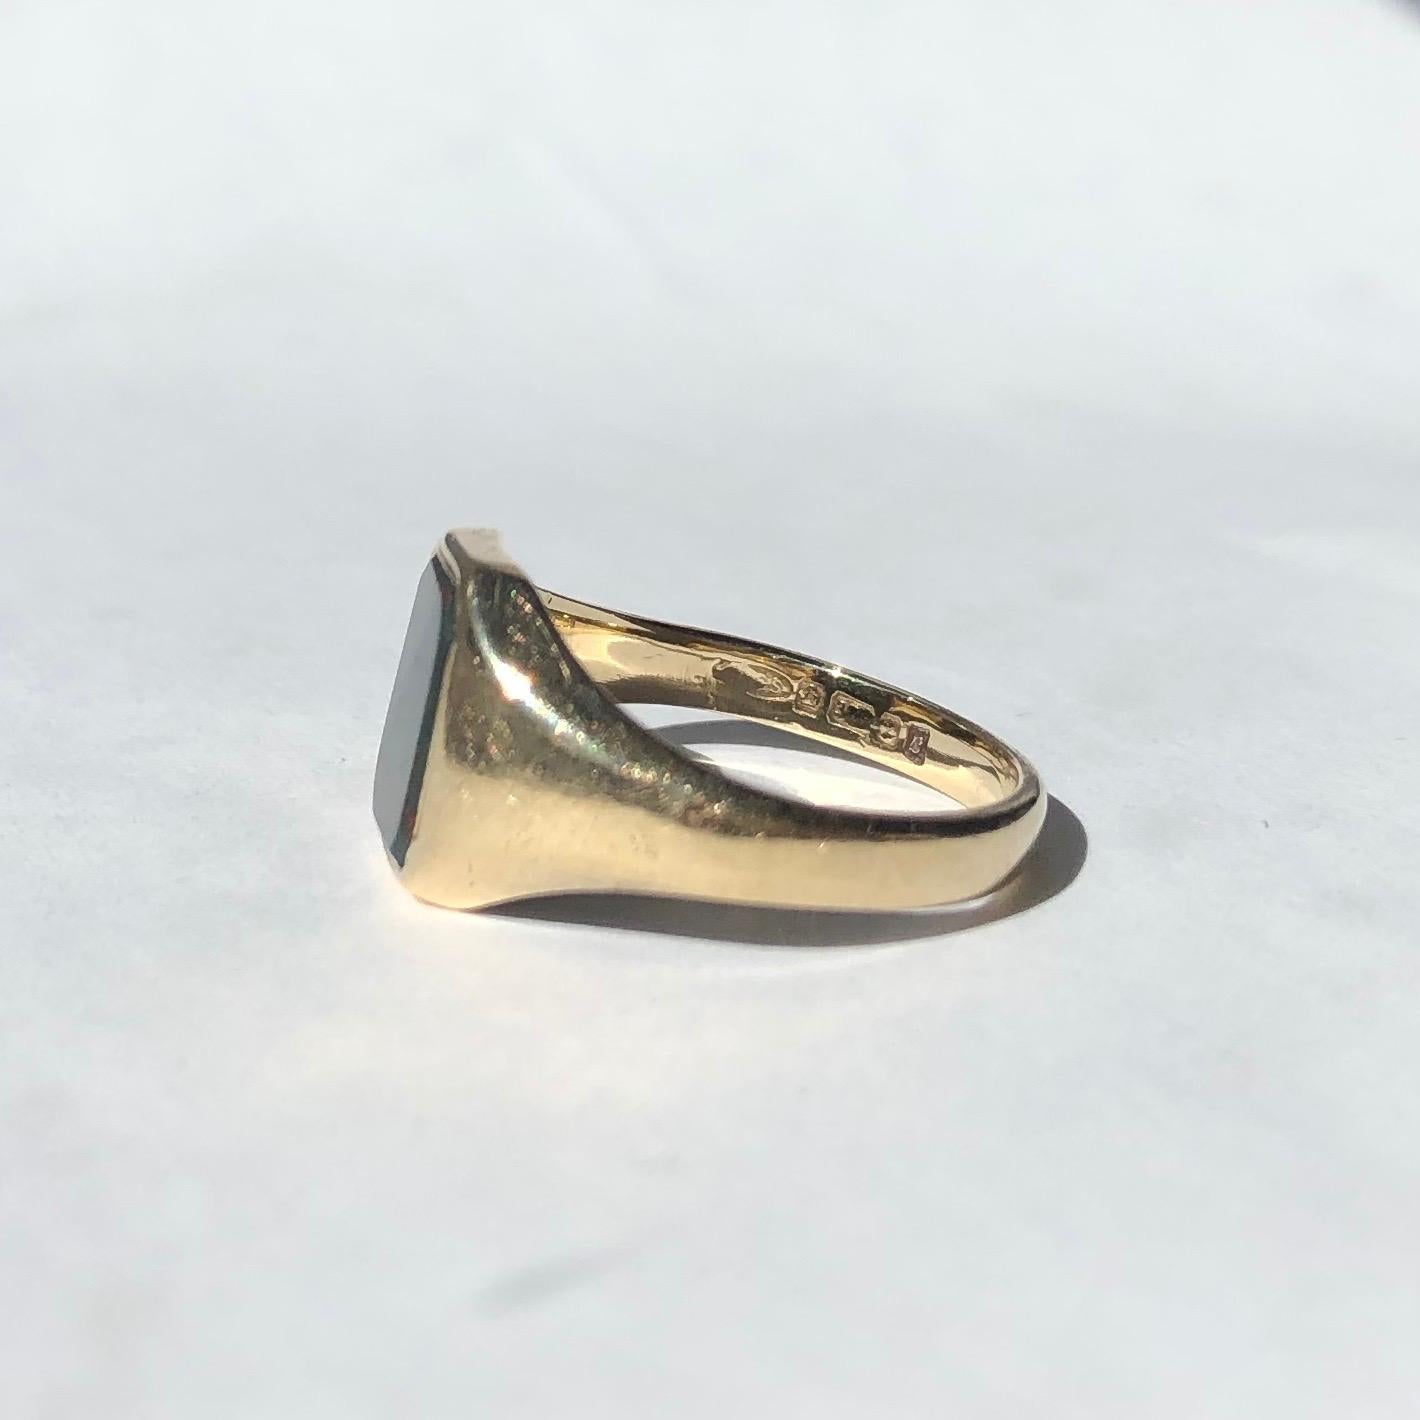 A fine vintage 1960s signet ring set with a superb flat cut bloodstone. Modelled in 9 carat yellow gold. Fully hallmarked London, England.

Ring Size: K 1/2 or 5 1/2 
Stone Dimensions: 7.5x6mm 

Weight: 2.5g